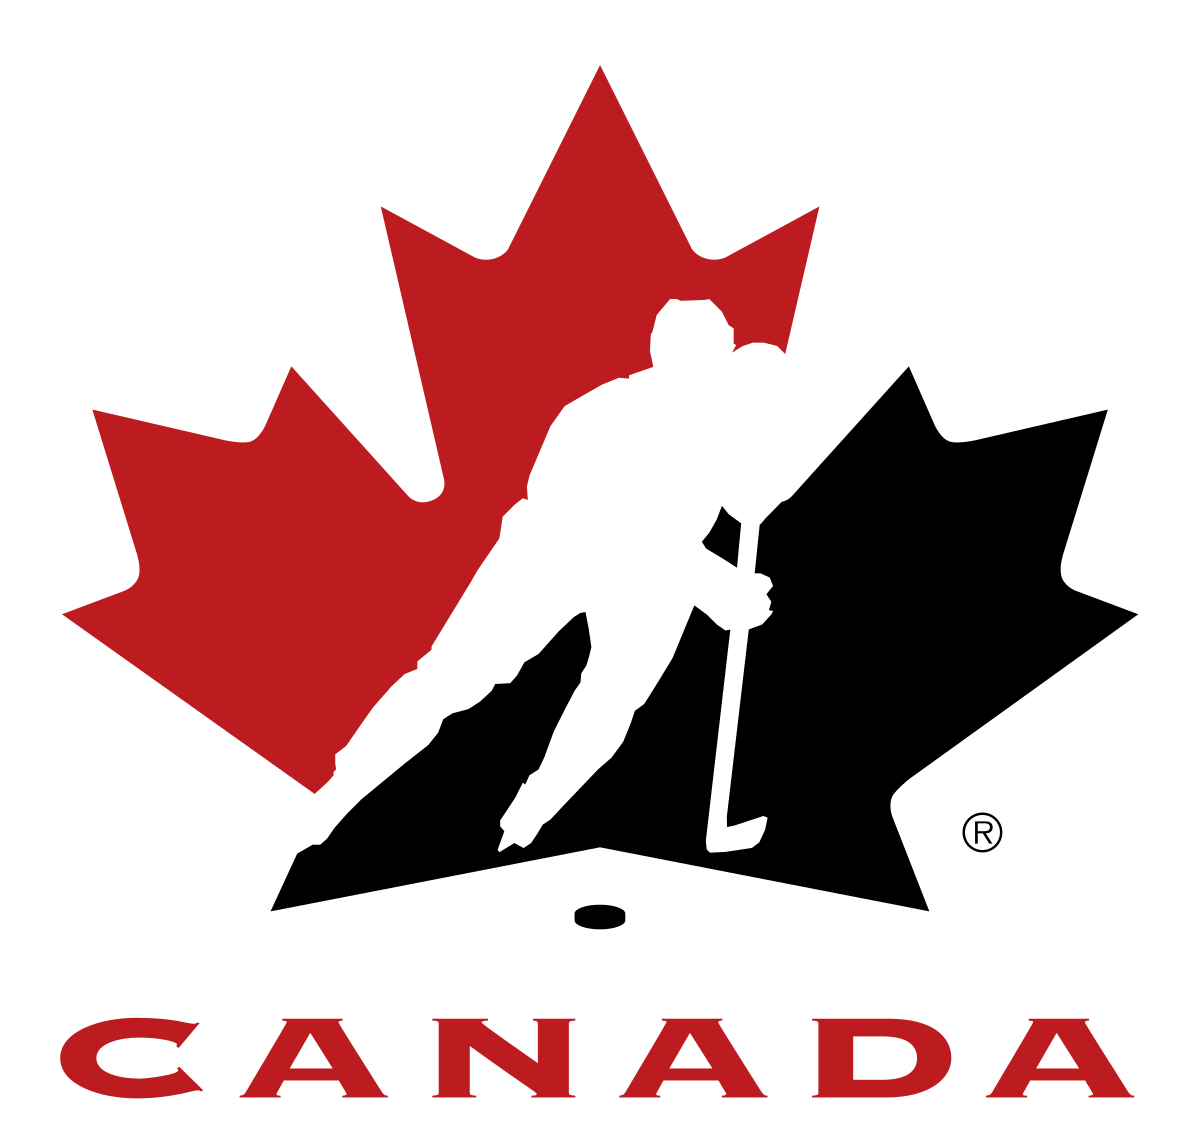 Hockey+Canada+has+faced+many+allegations+of+abuse+following+their+treatment+of+the+2018+case